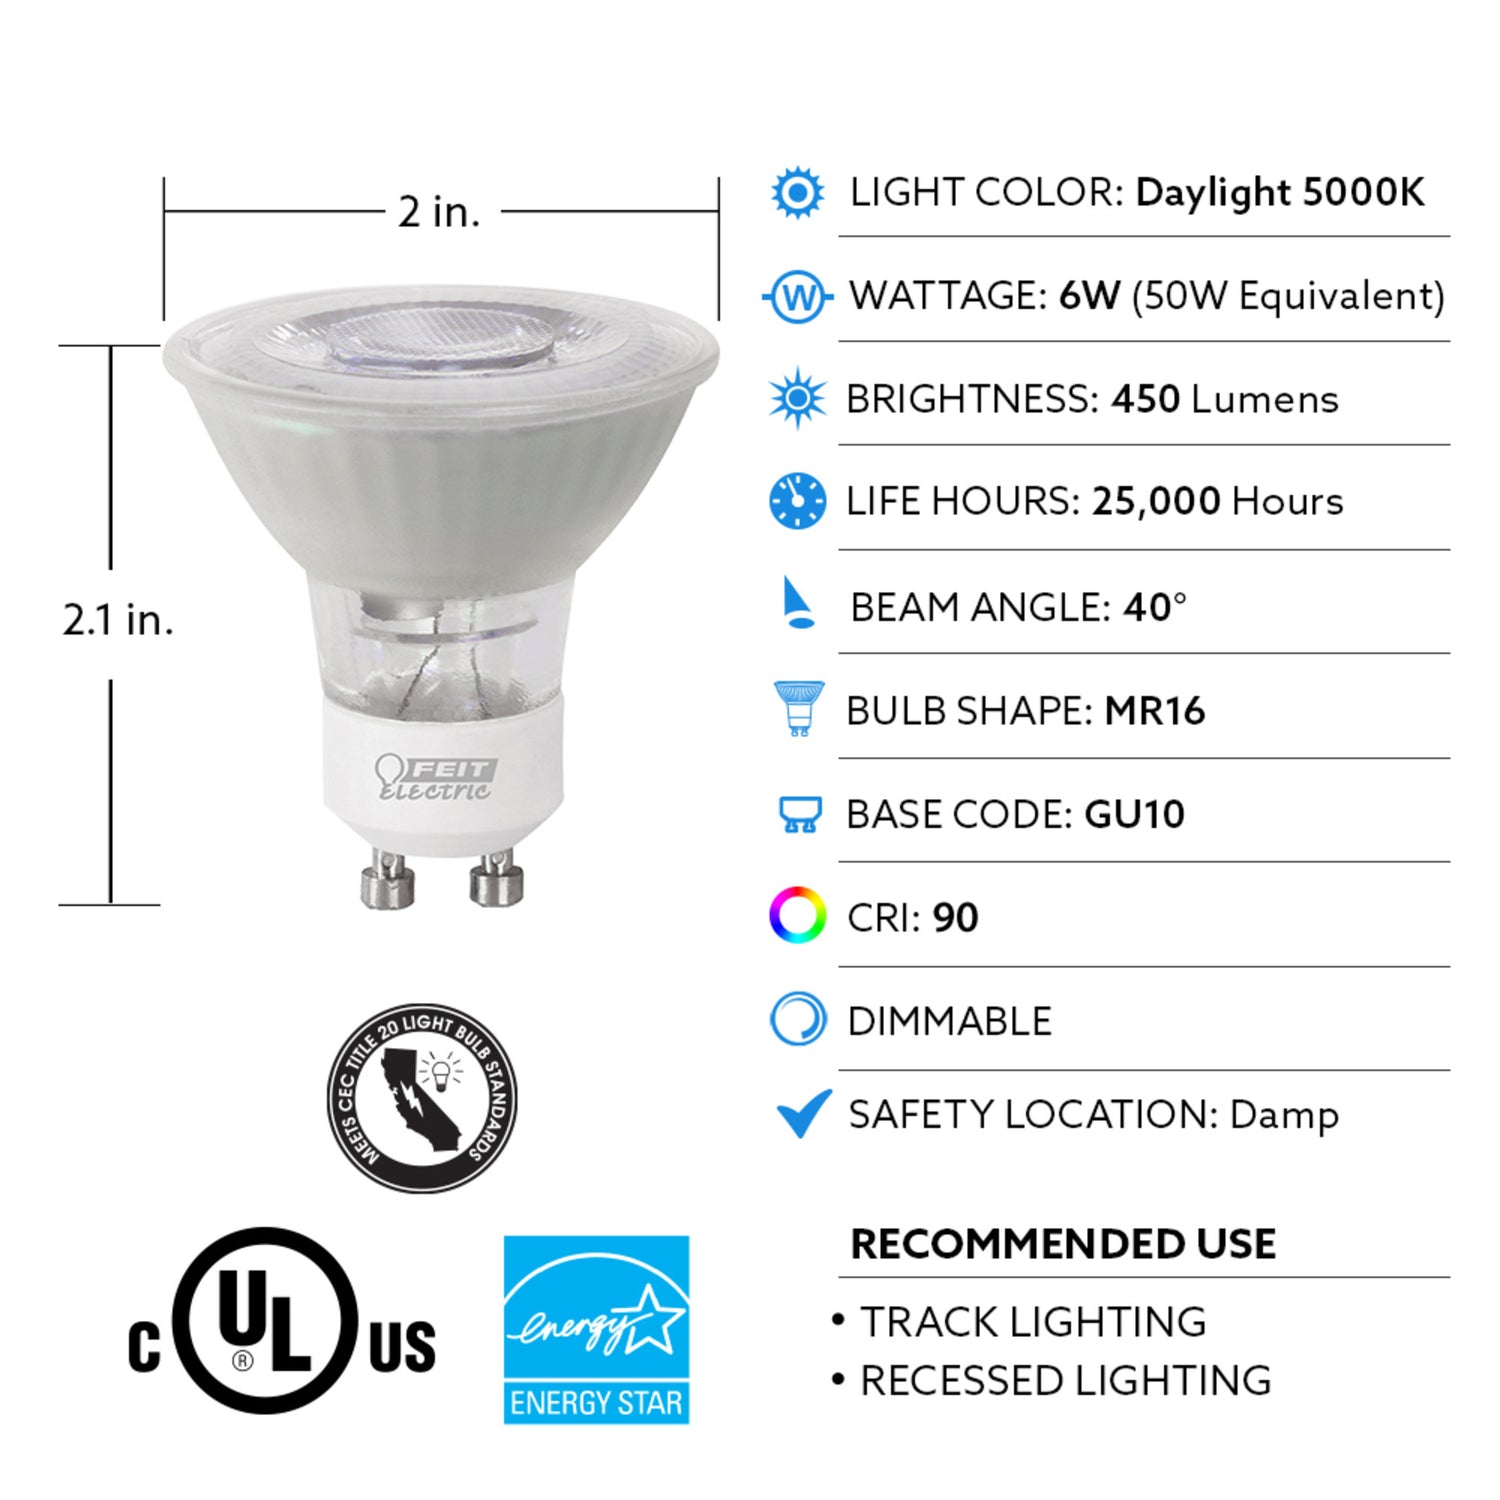 6W (50W Replacement) Daylight (5000K) GU10 Base MR16 Dimmable LED (3-Pack)